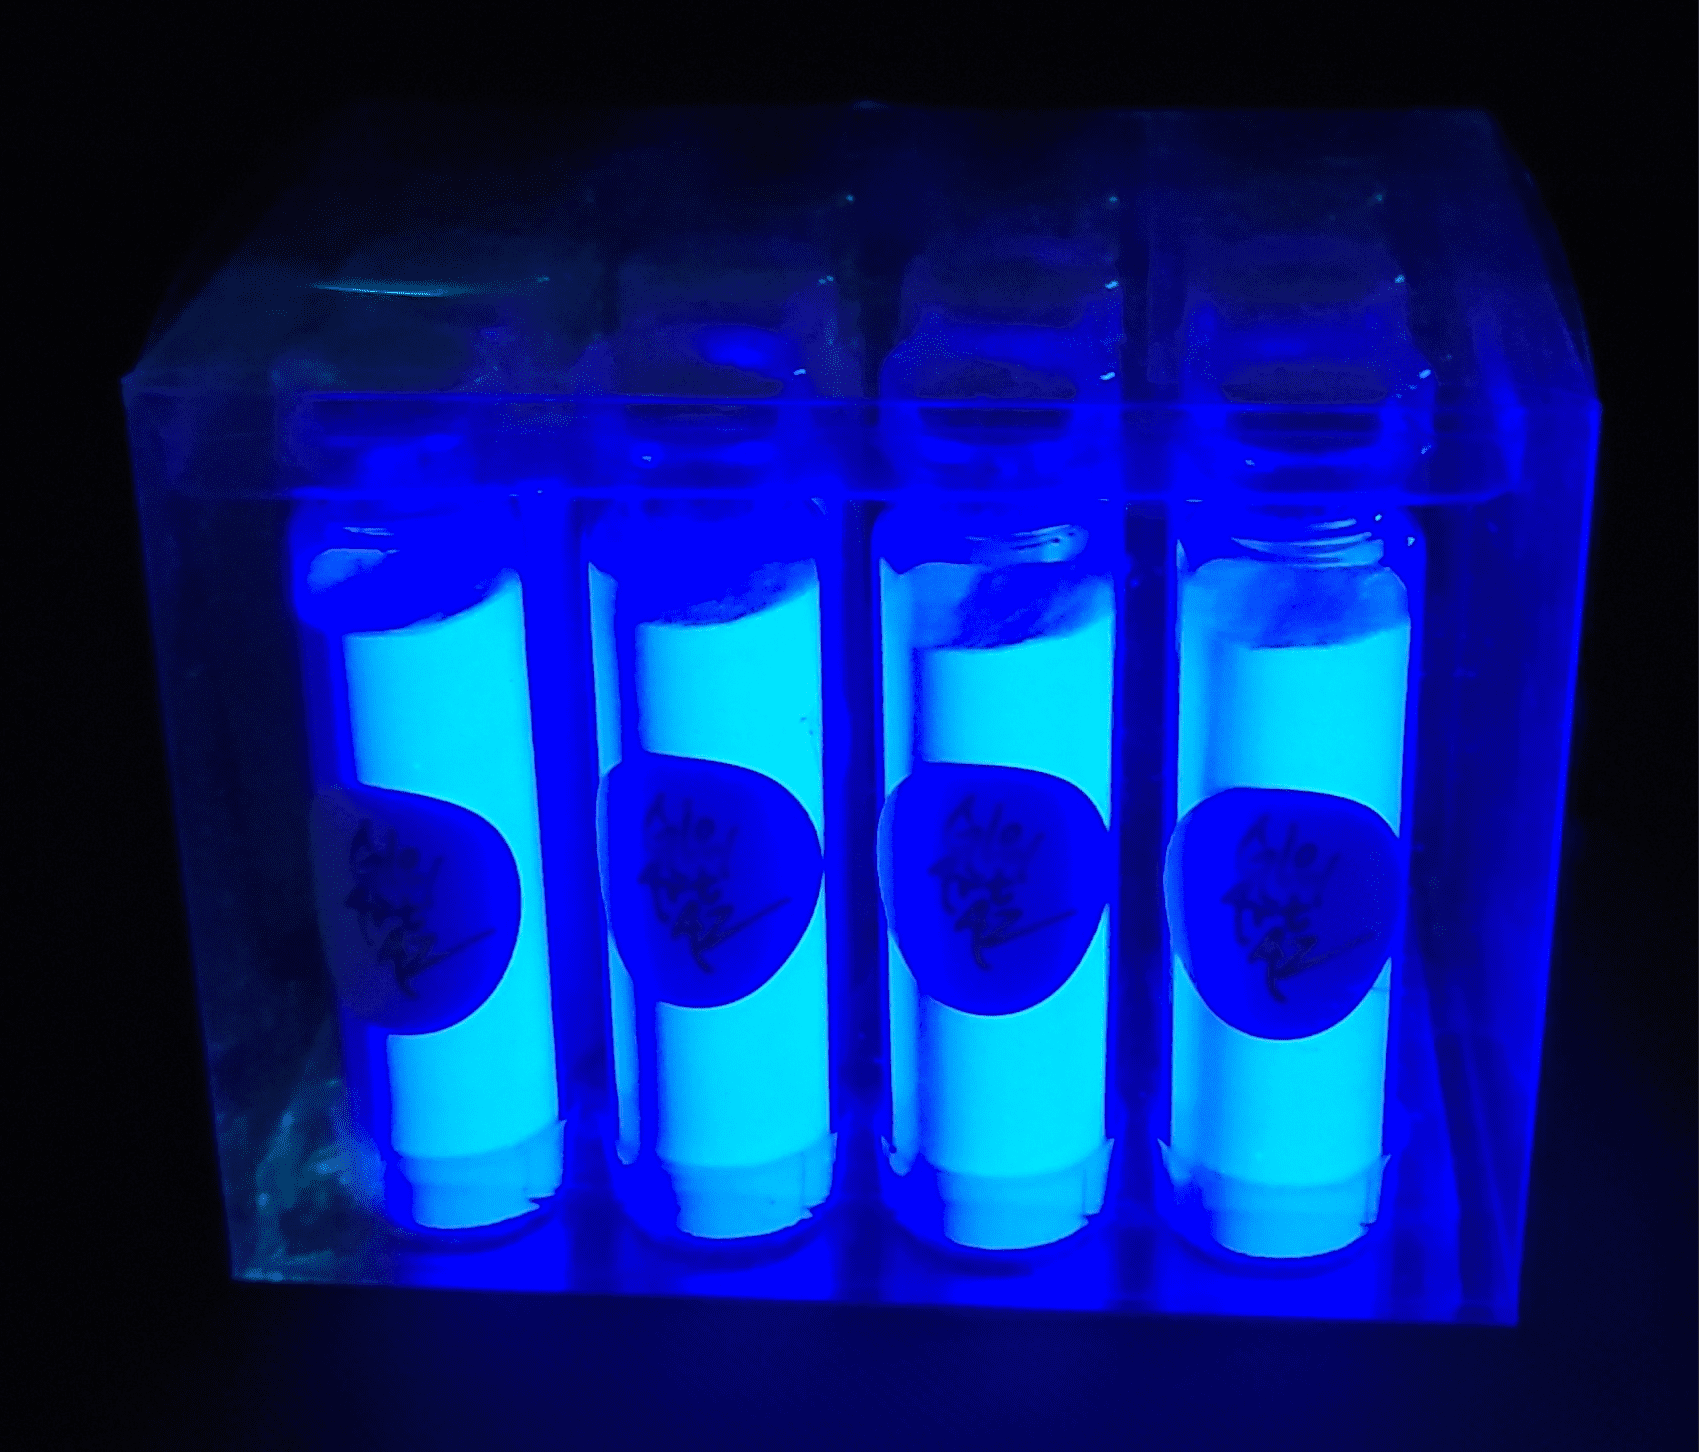 9,000 Glow in The Dark Fuse Beads Set (6 Unique Colors) in Case and  Separated - Works with Perler Beads, Pixel Art Project